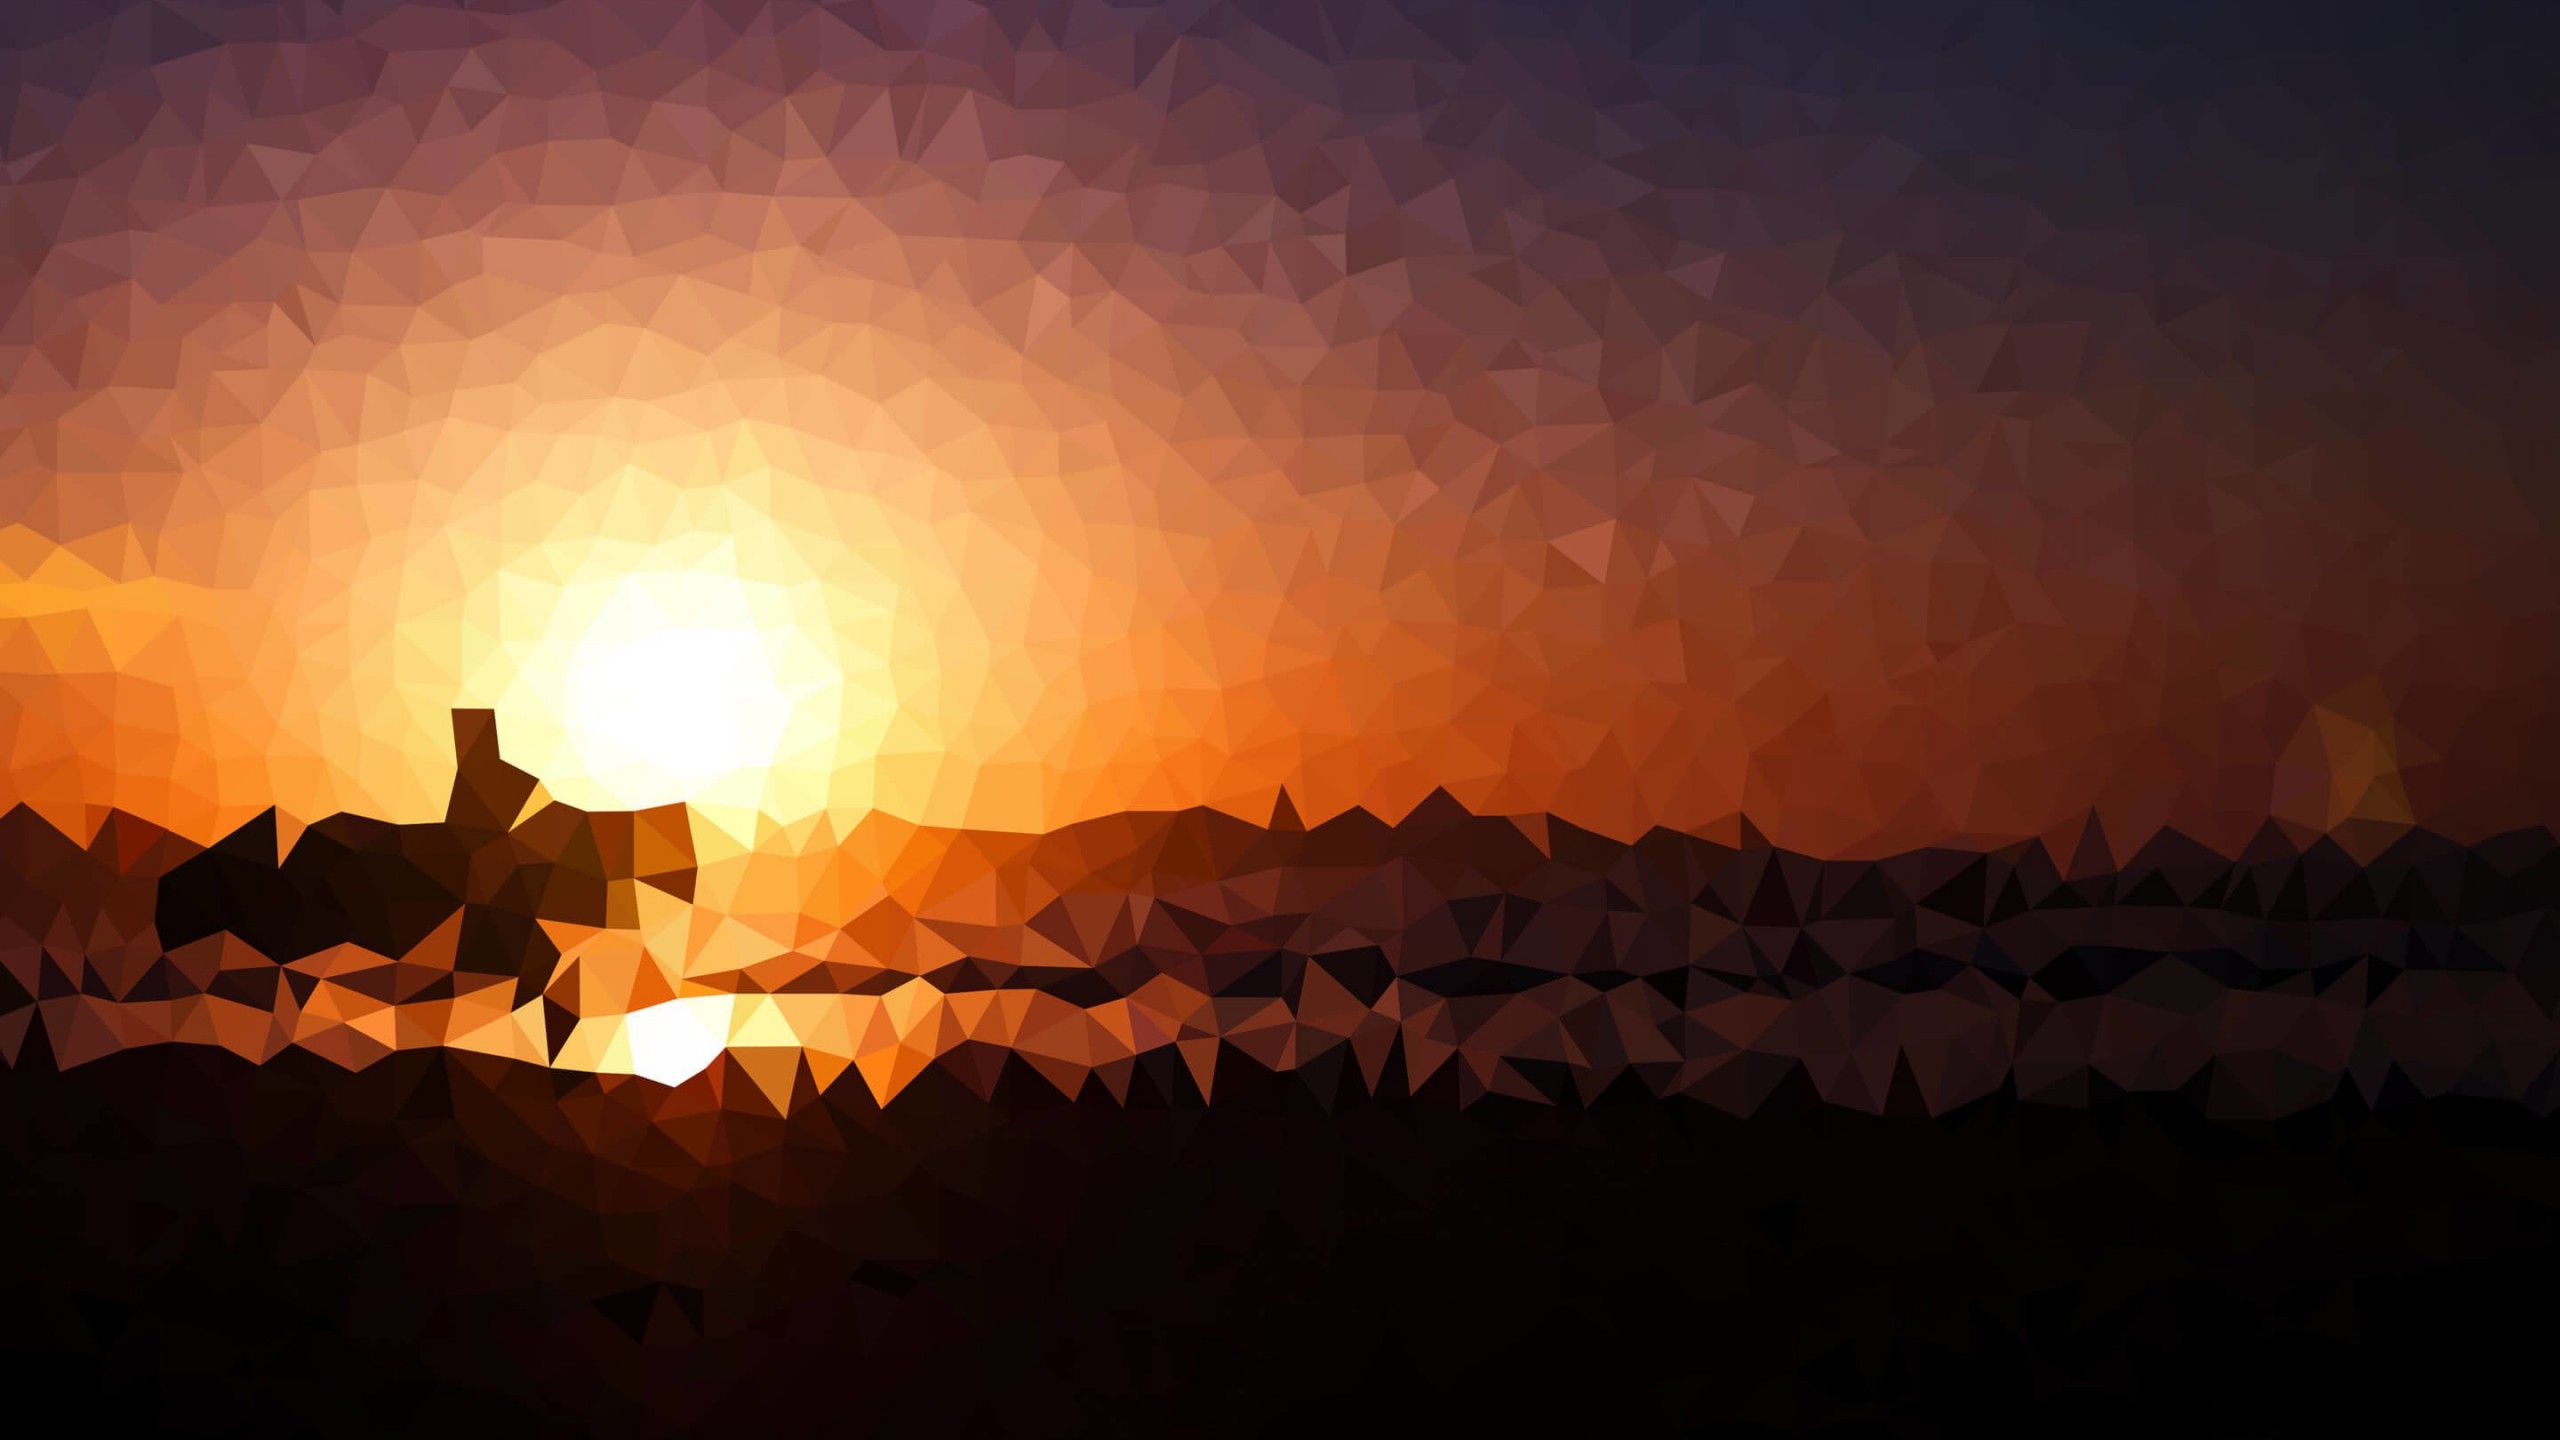 Low Poly Sunset Wallpaper for Social Media YouTube Channel Art